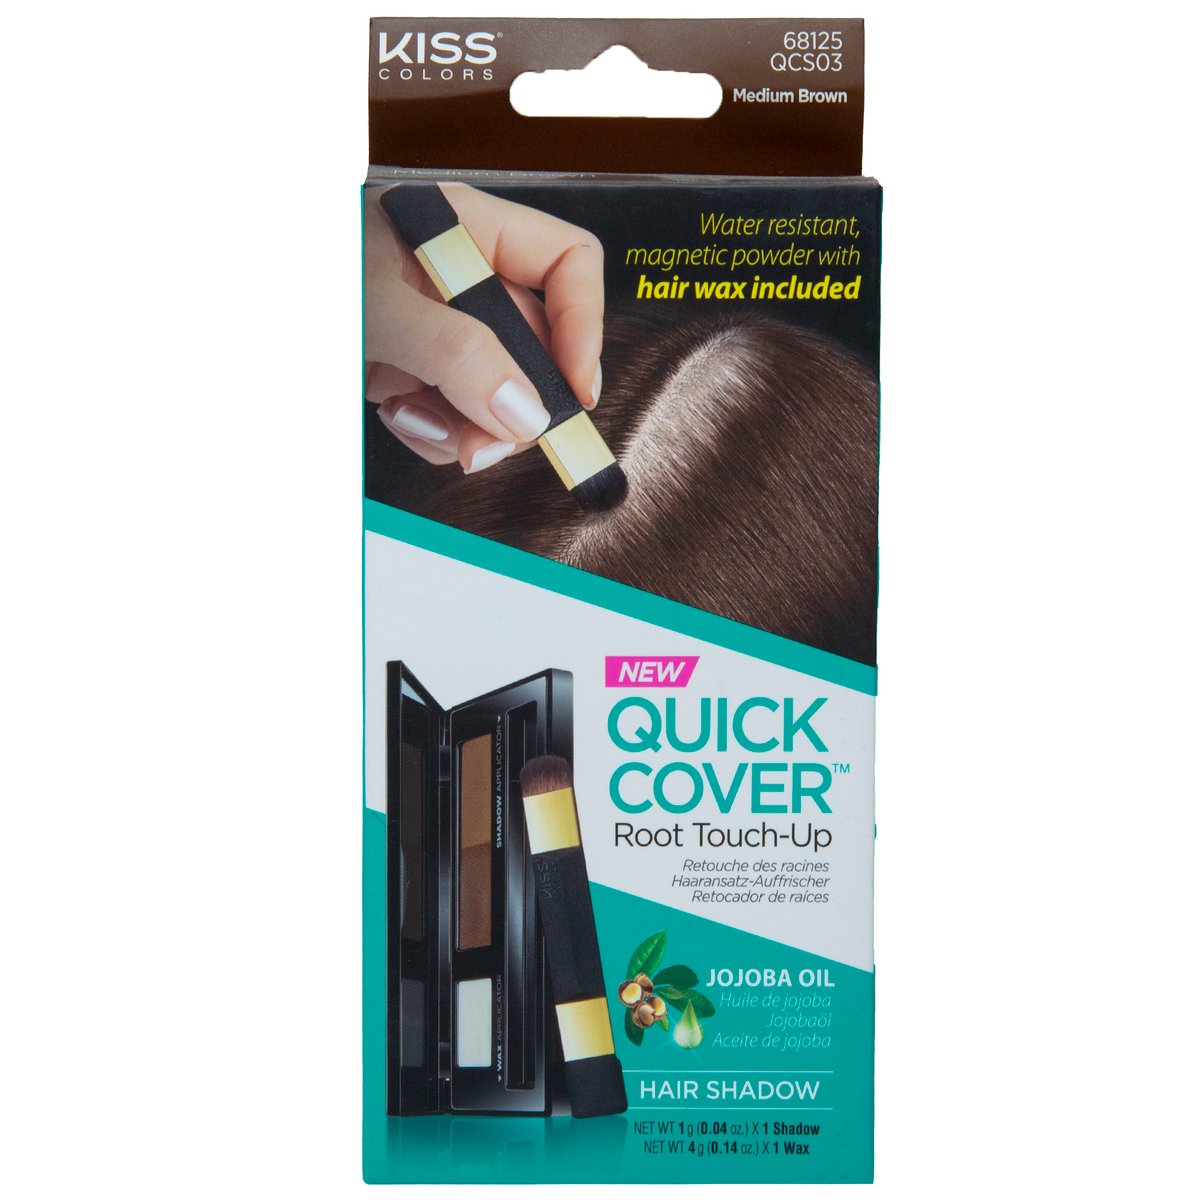 Kiss Quick Cover Root Touch Up Jojoba Oil Medium Brown, 1 pkt